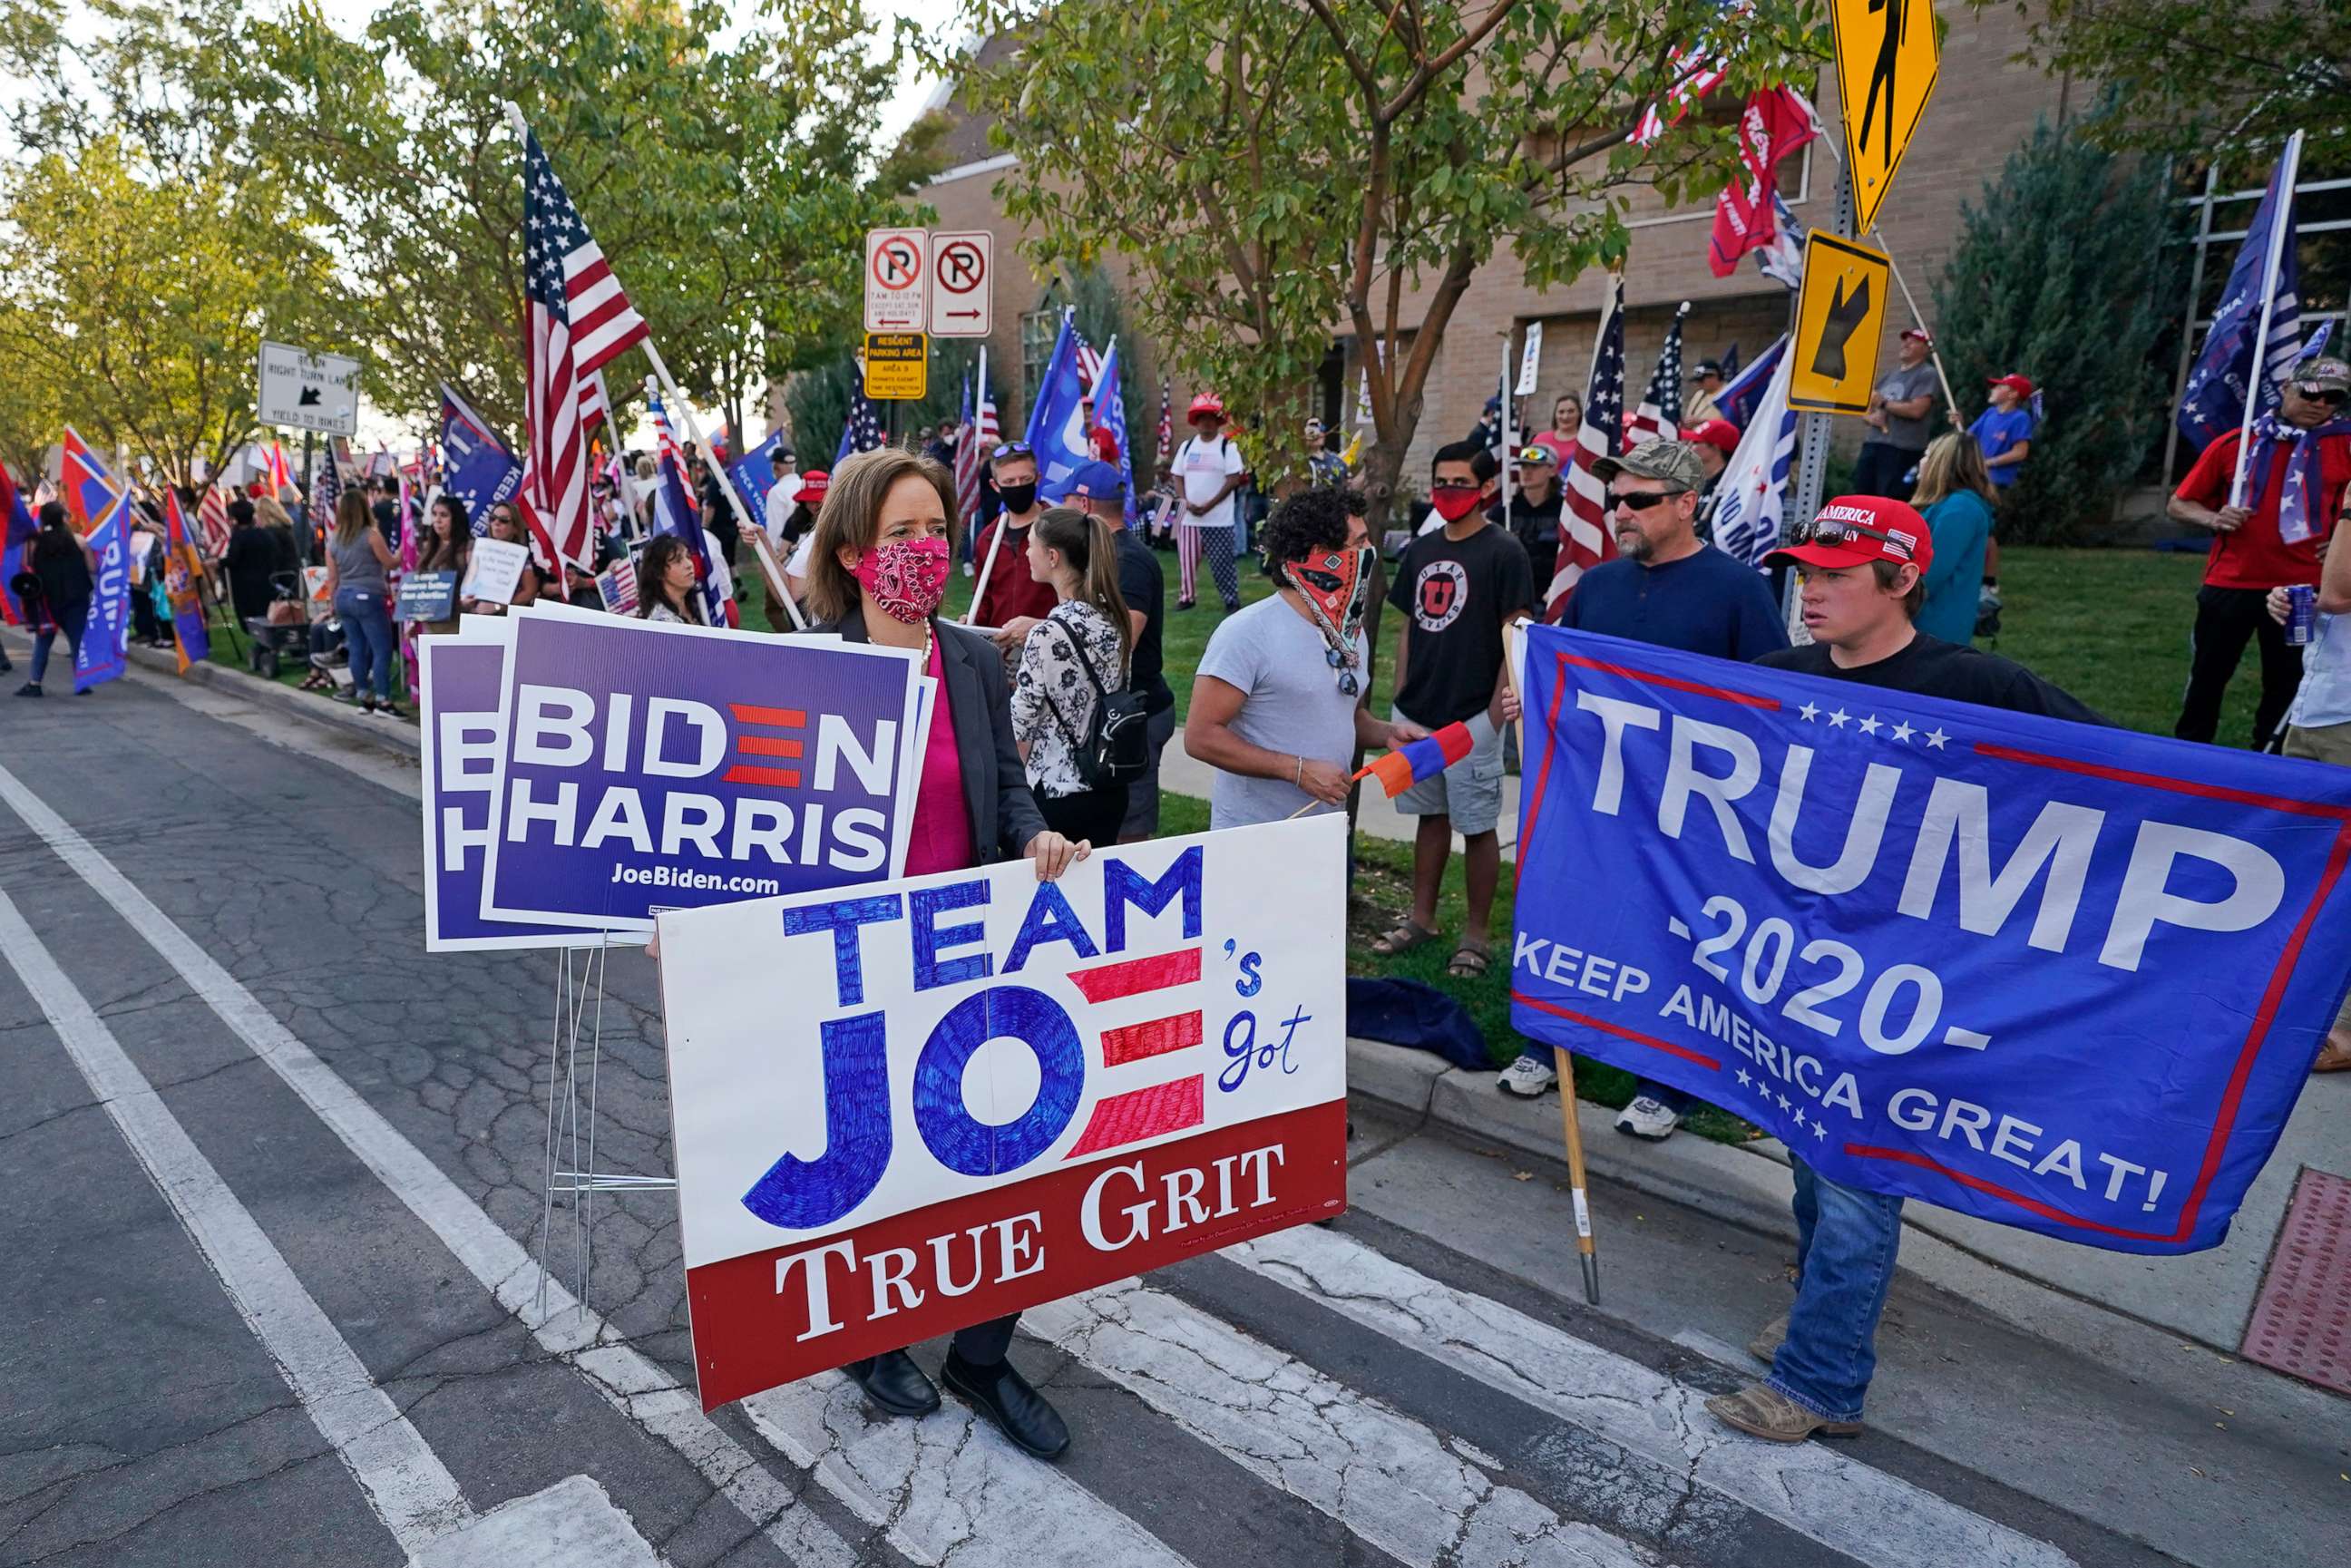 PHOTO: People holding signs in support gather near the site of the vice presidential debate between Vice President Mike Pence and Sen. Kamala Harris, at the University of Utah Oct. 7, 2020, in Salt Lake City.